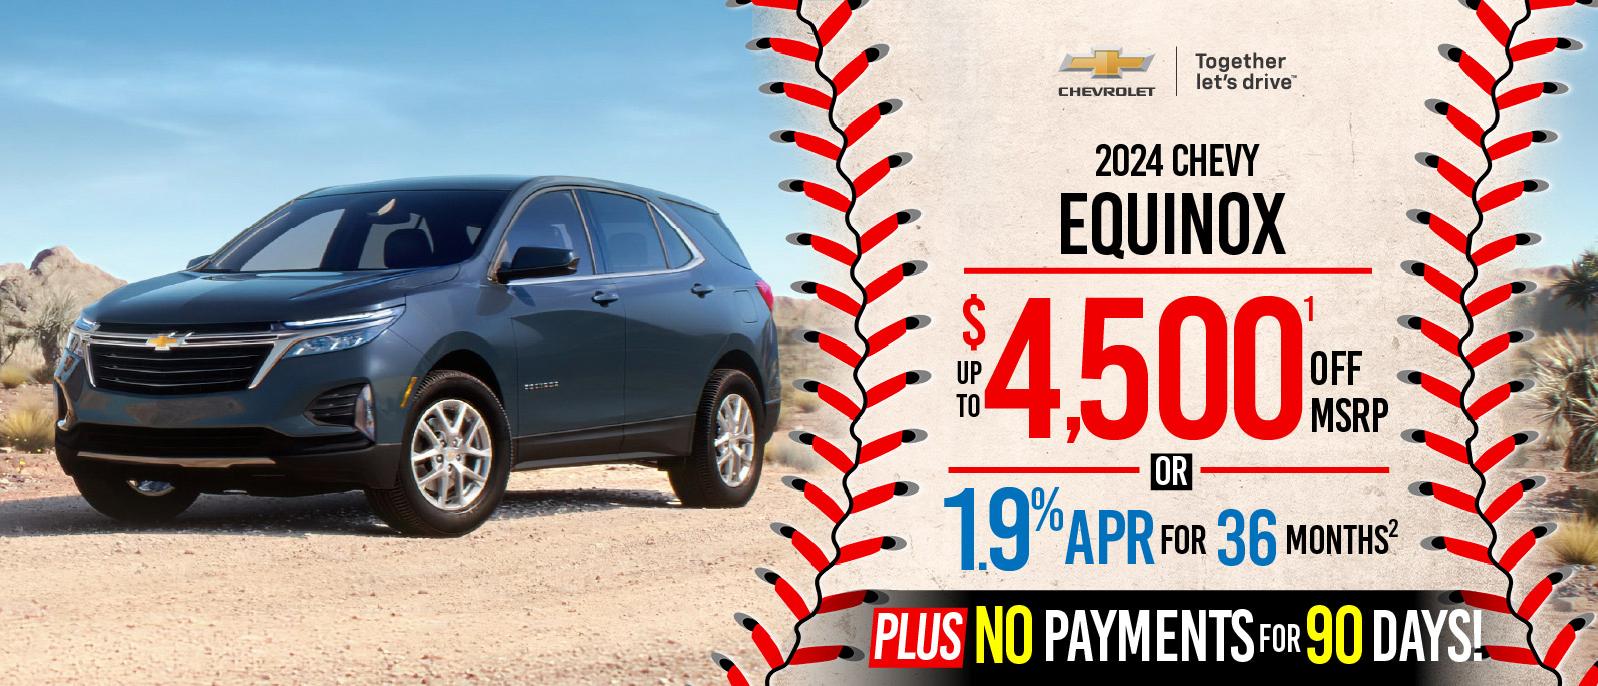 2024 Chevy Equinox - SAVE up to $4500 or 1.9% APR for 36 months plus no payments for 90 days